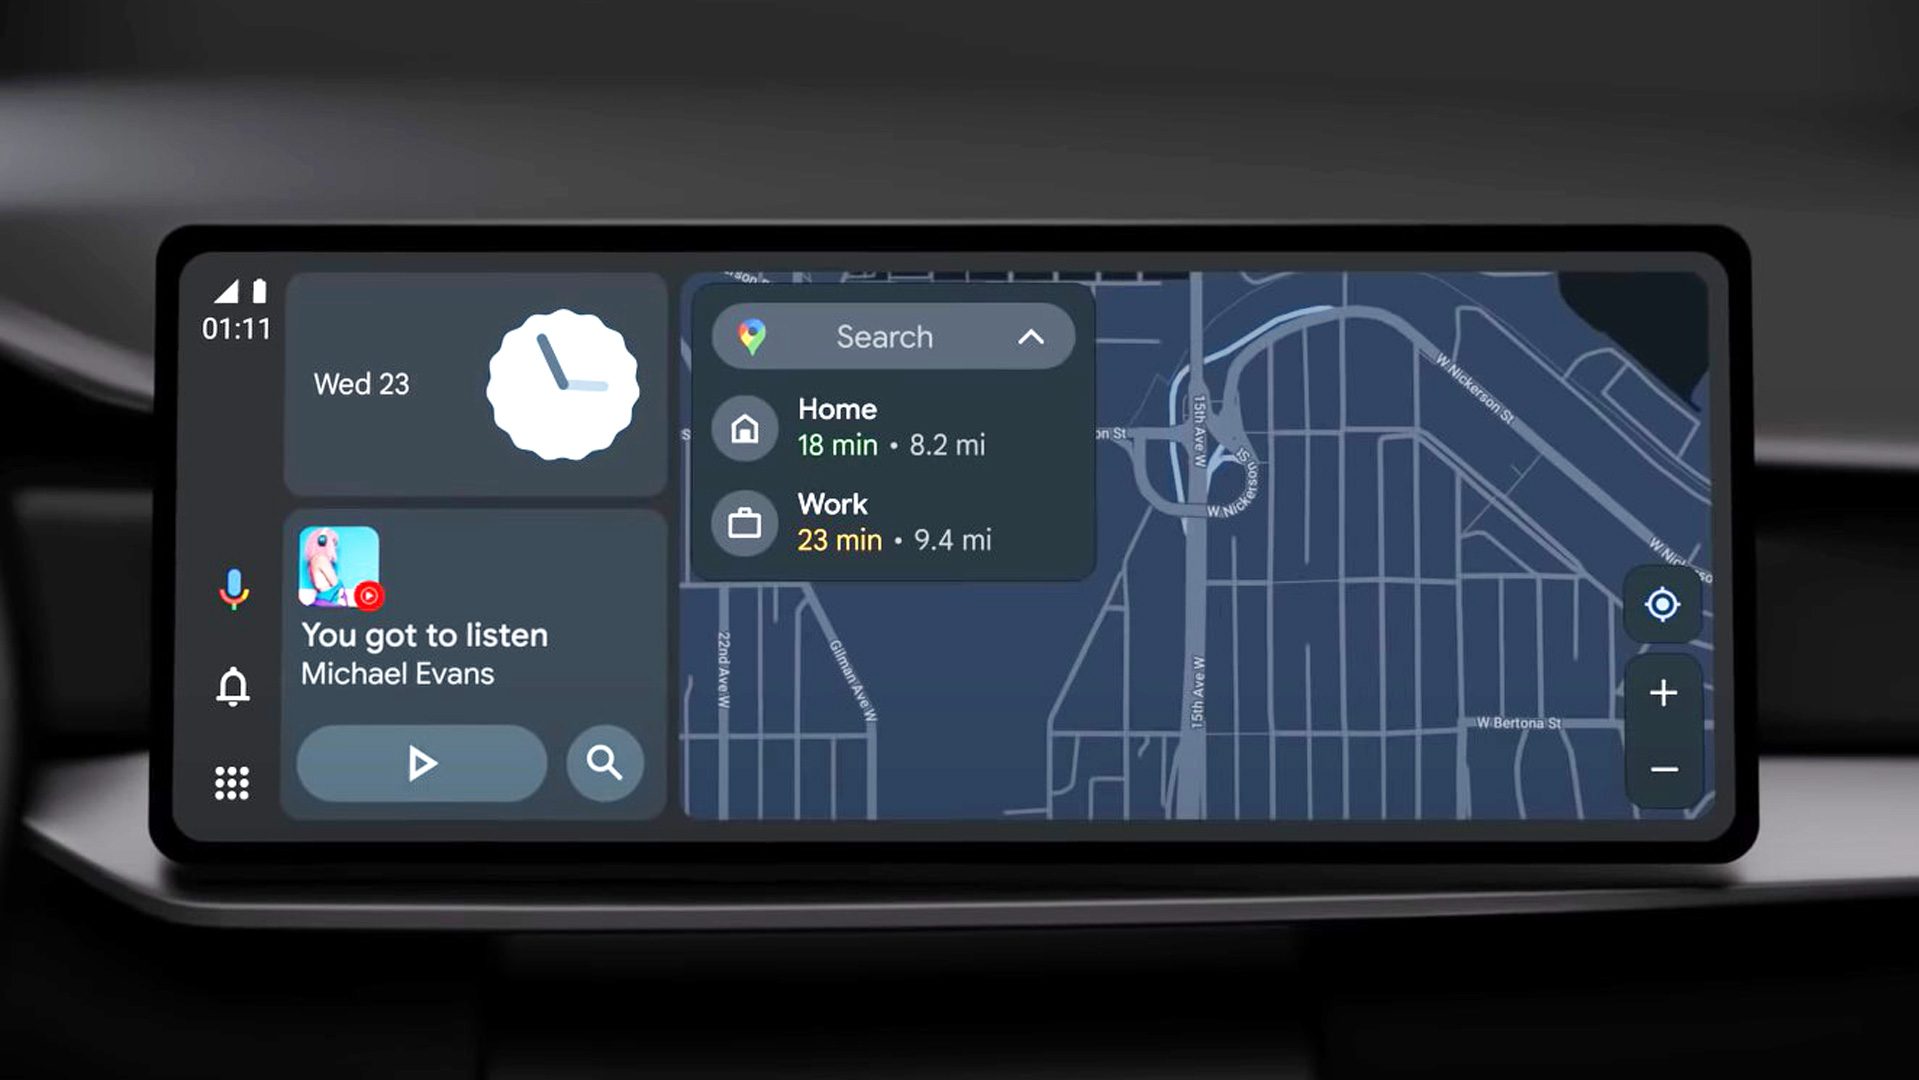 https://fscl01.fonpit.de/userfiles/7734655/image/Android-Auto-update-coming-2022-new-features-design.jpg